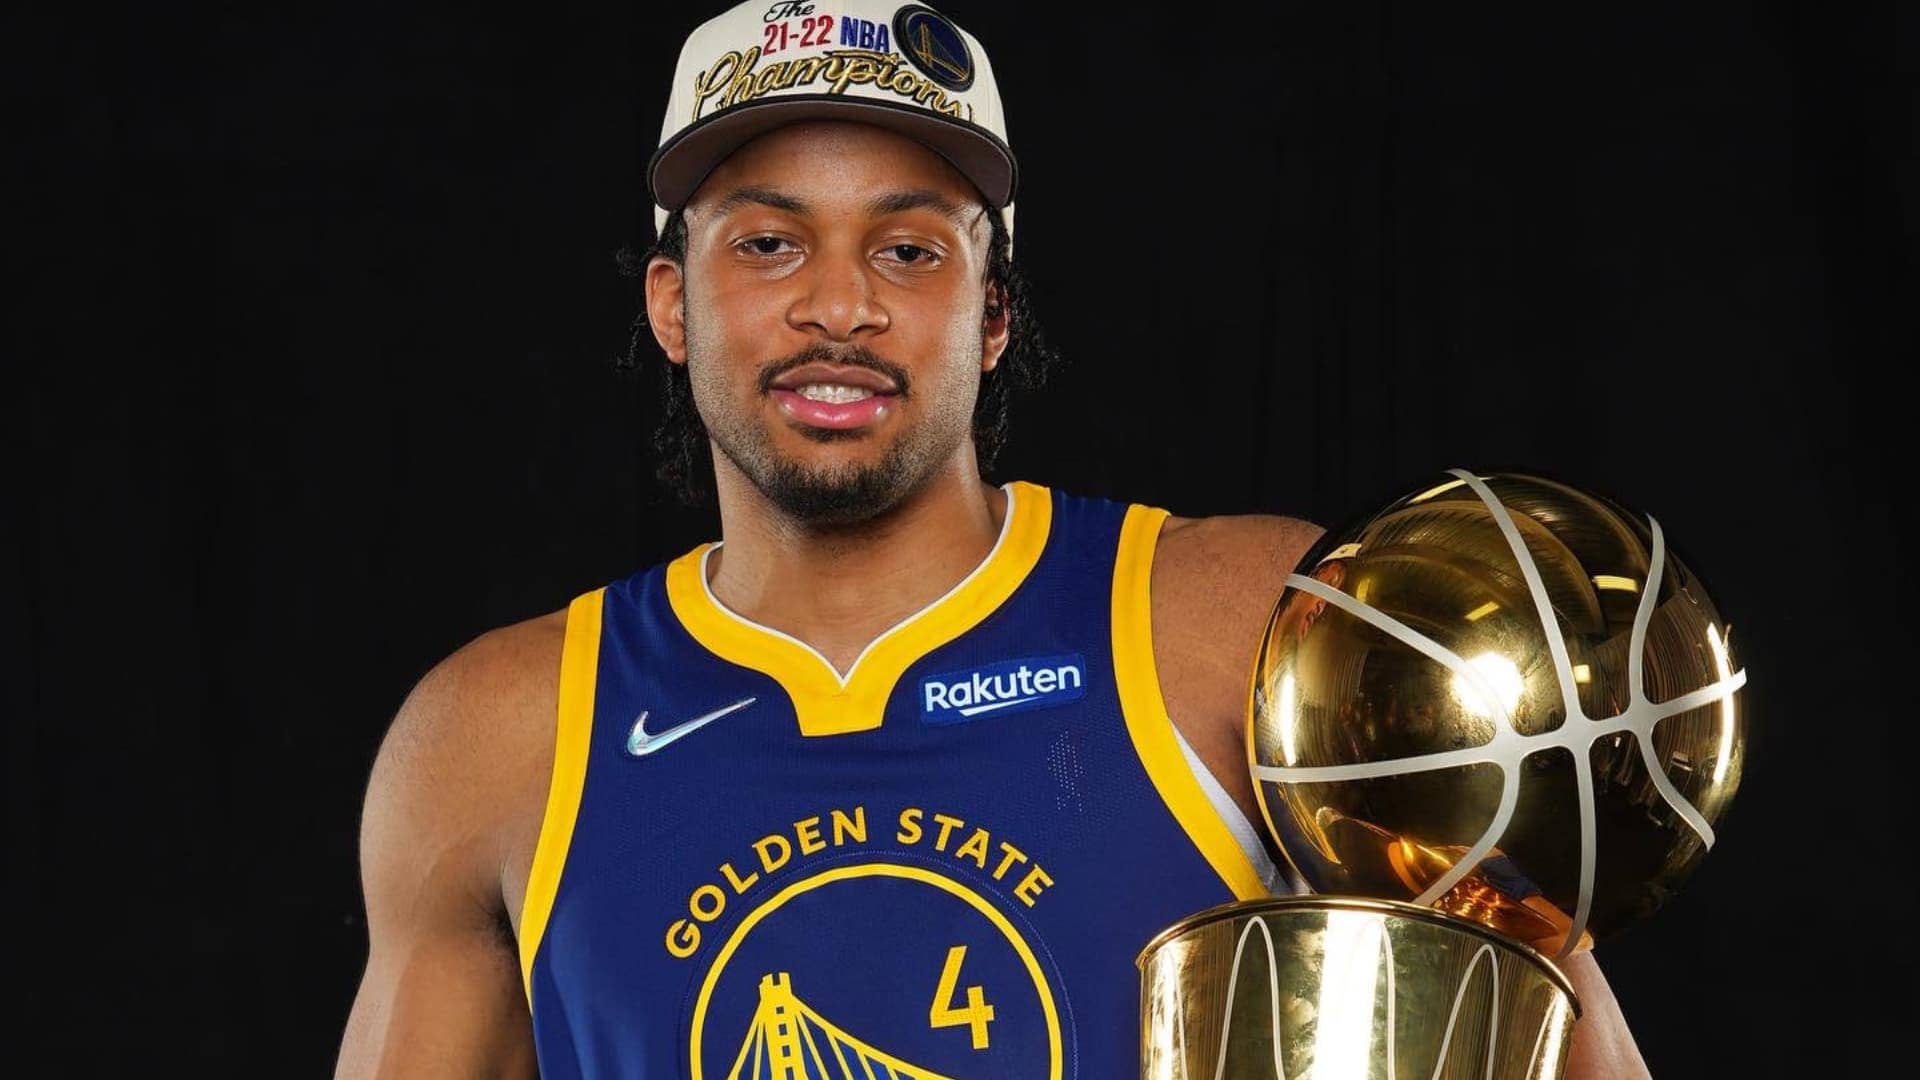 At just 20 years and 16 days old, Moses Moody made history as the fourth-youngest player to win an NBA championship when the Golden State Warriors